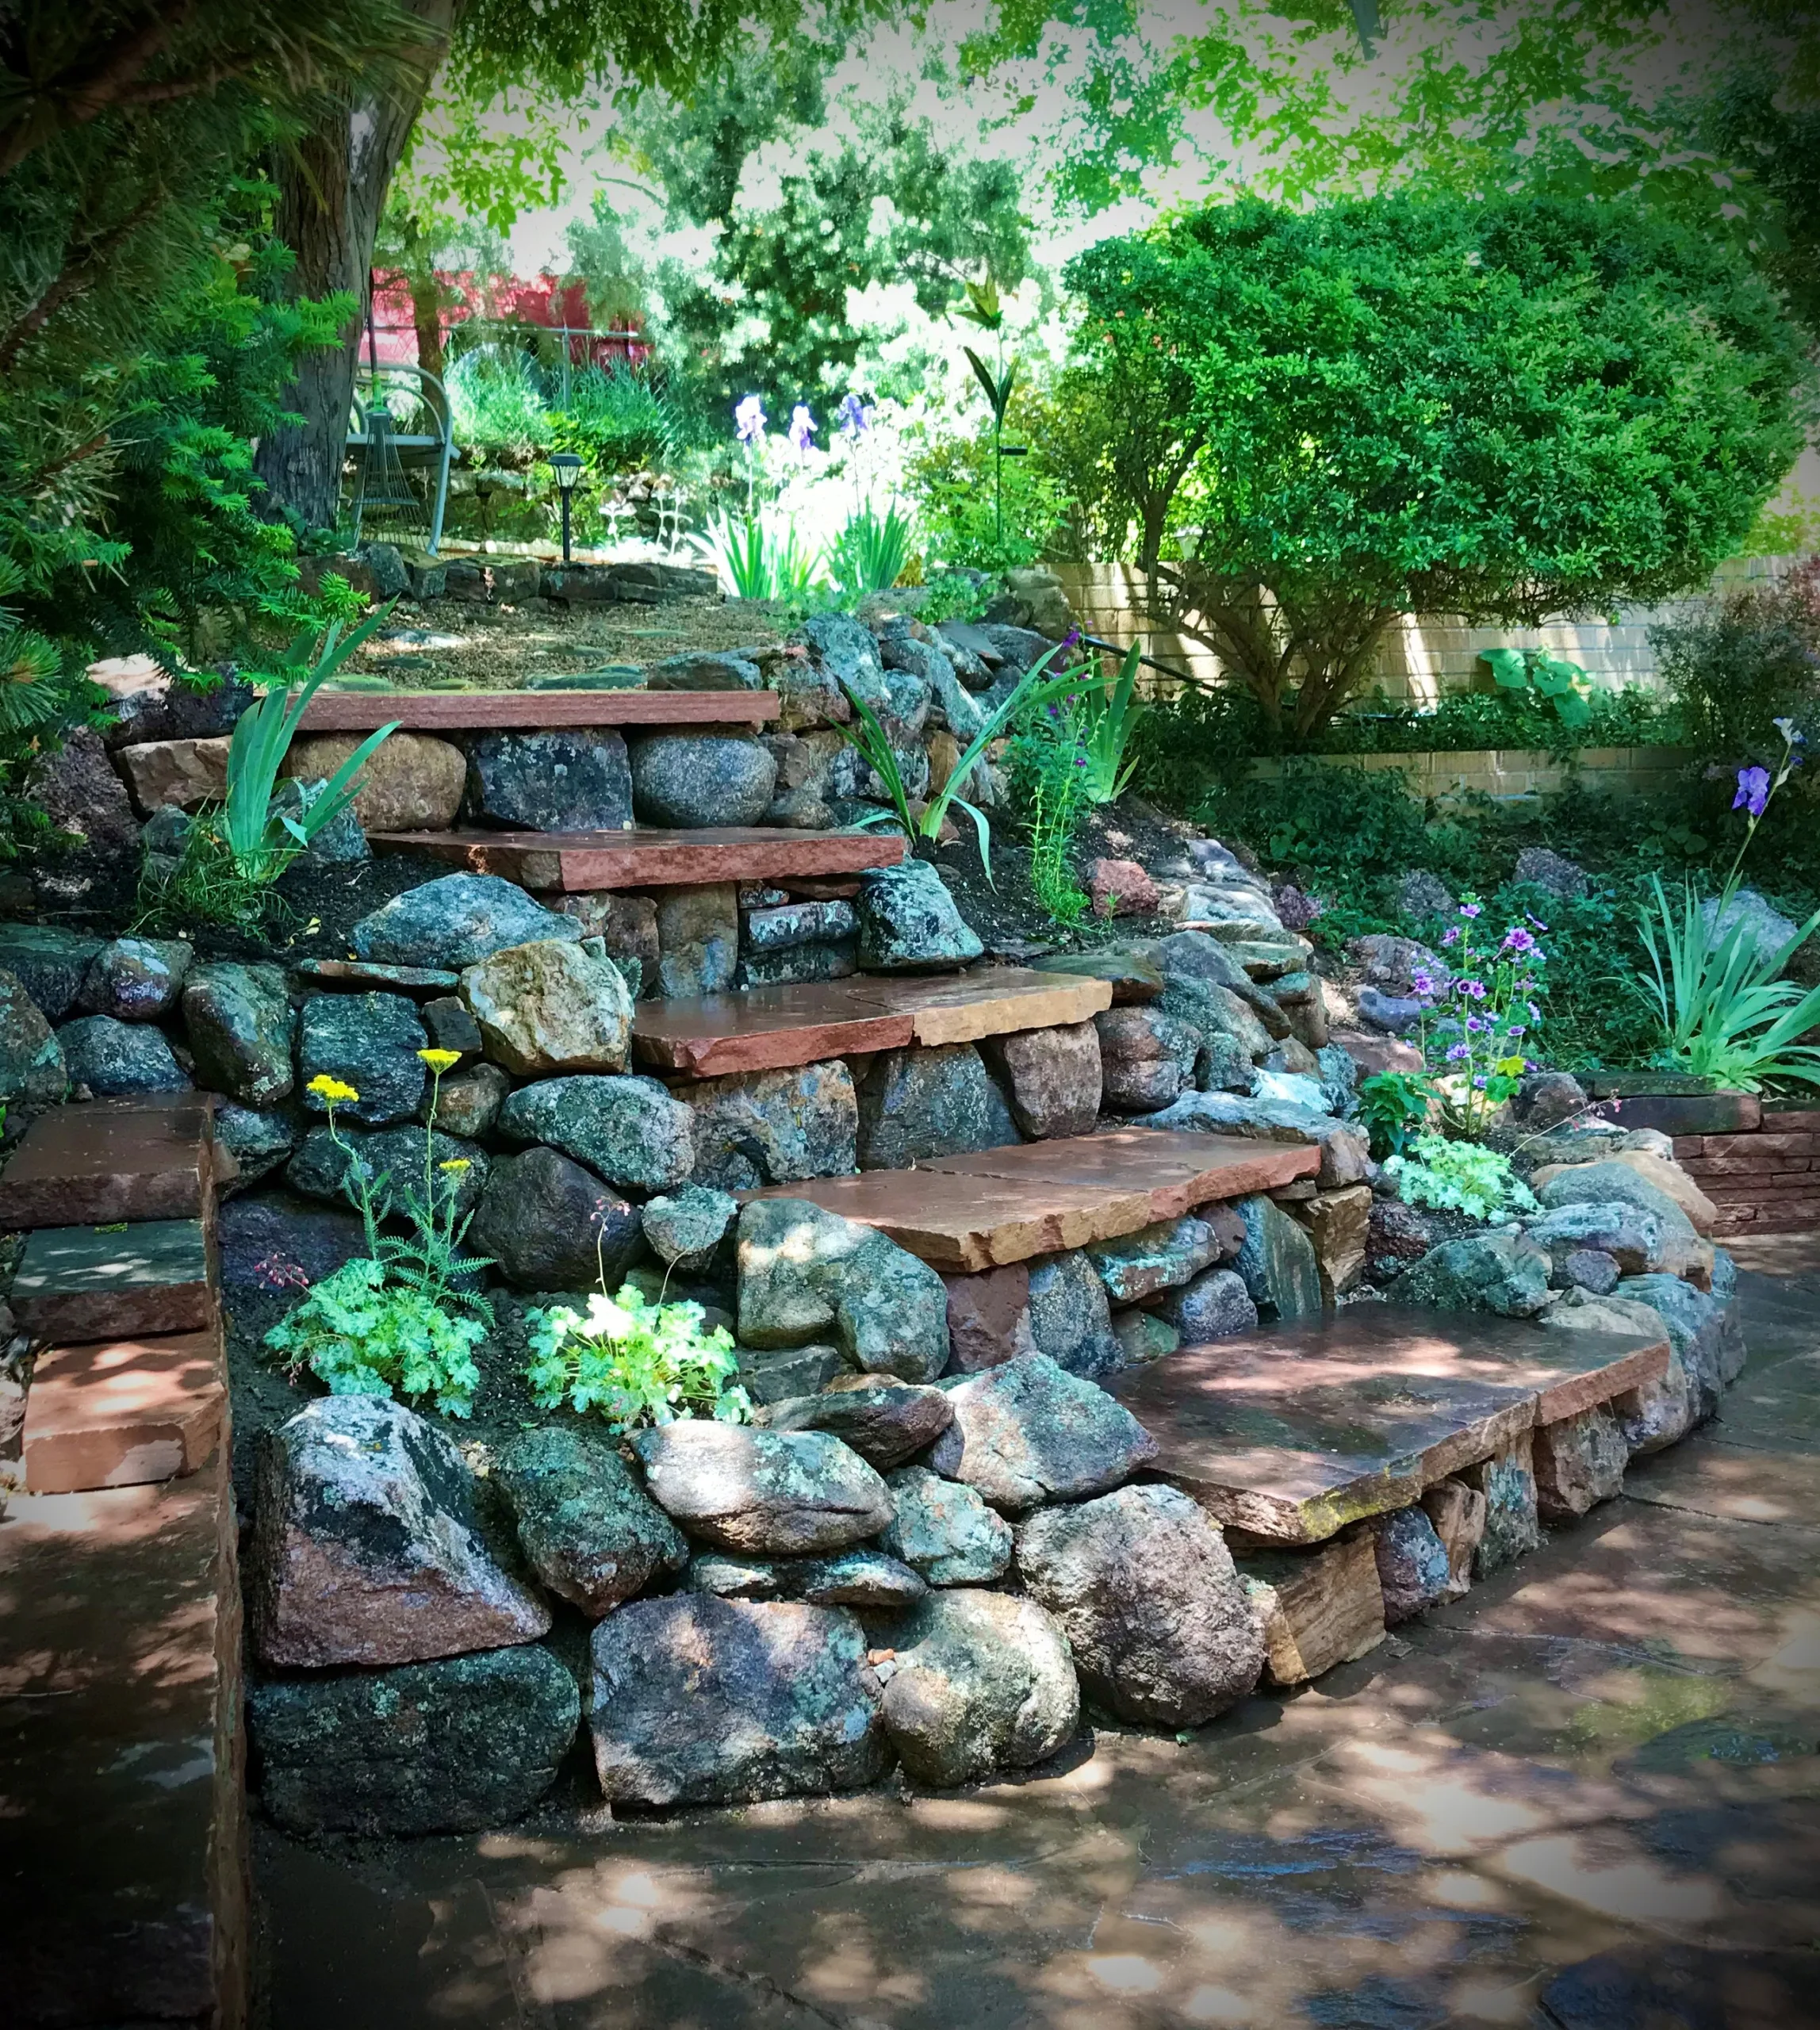 Thad Murwin, Moss Rock Boulders and Red Flagstone Steps